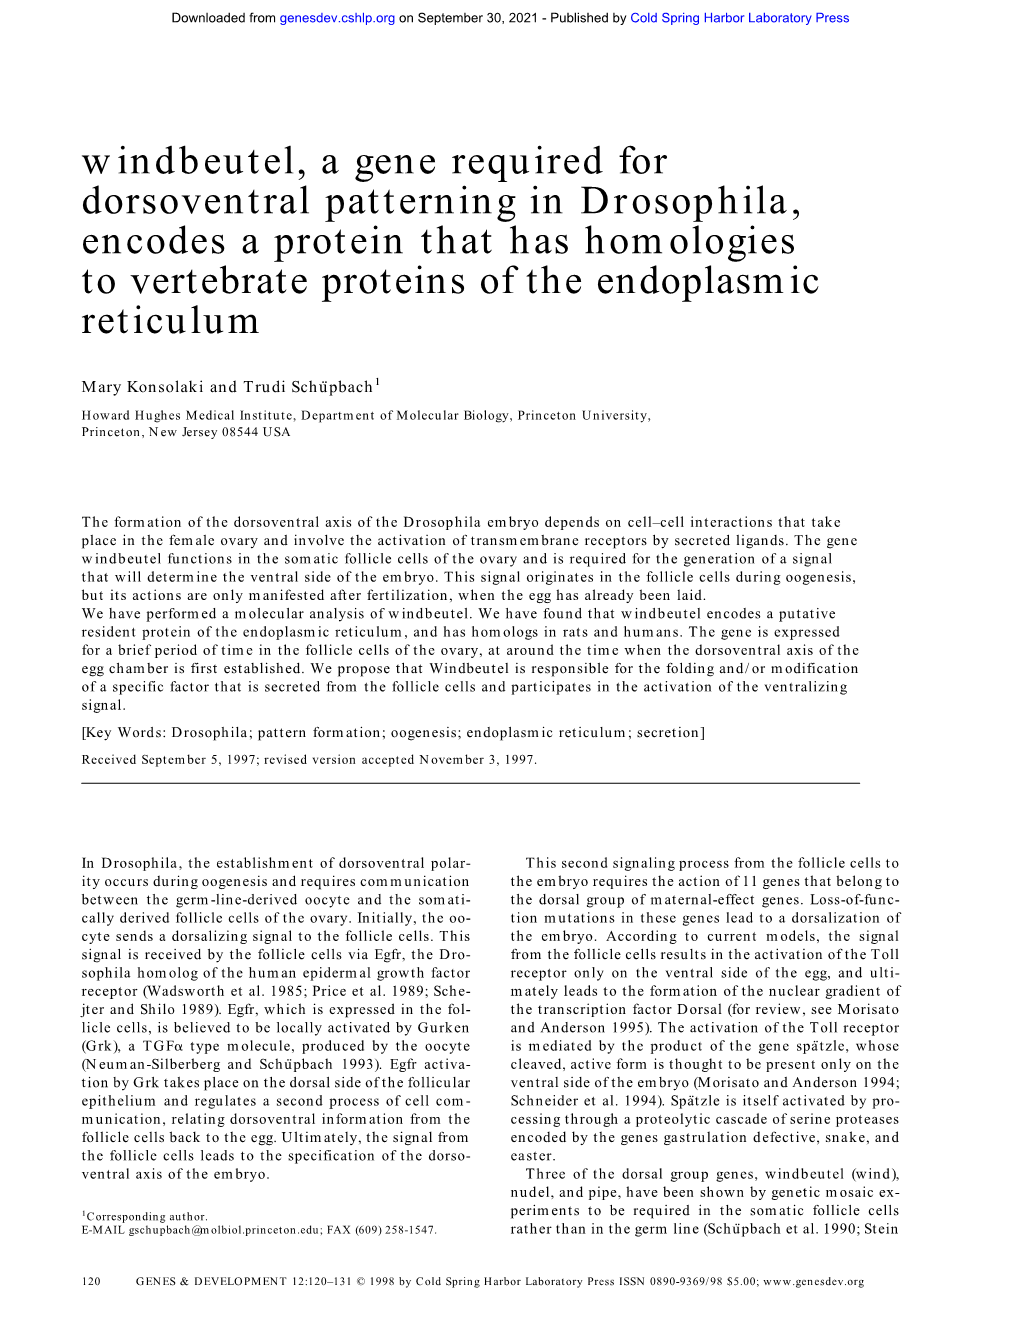 Windbeutel, a Gene Required for Dorsoventral Patterning in Drosophila, Encodes a Protein That Has Homologies to Vertebrate Proteins of the Endoplasmic Reticulum